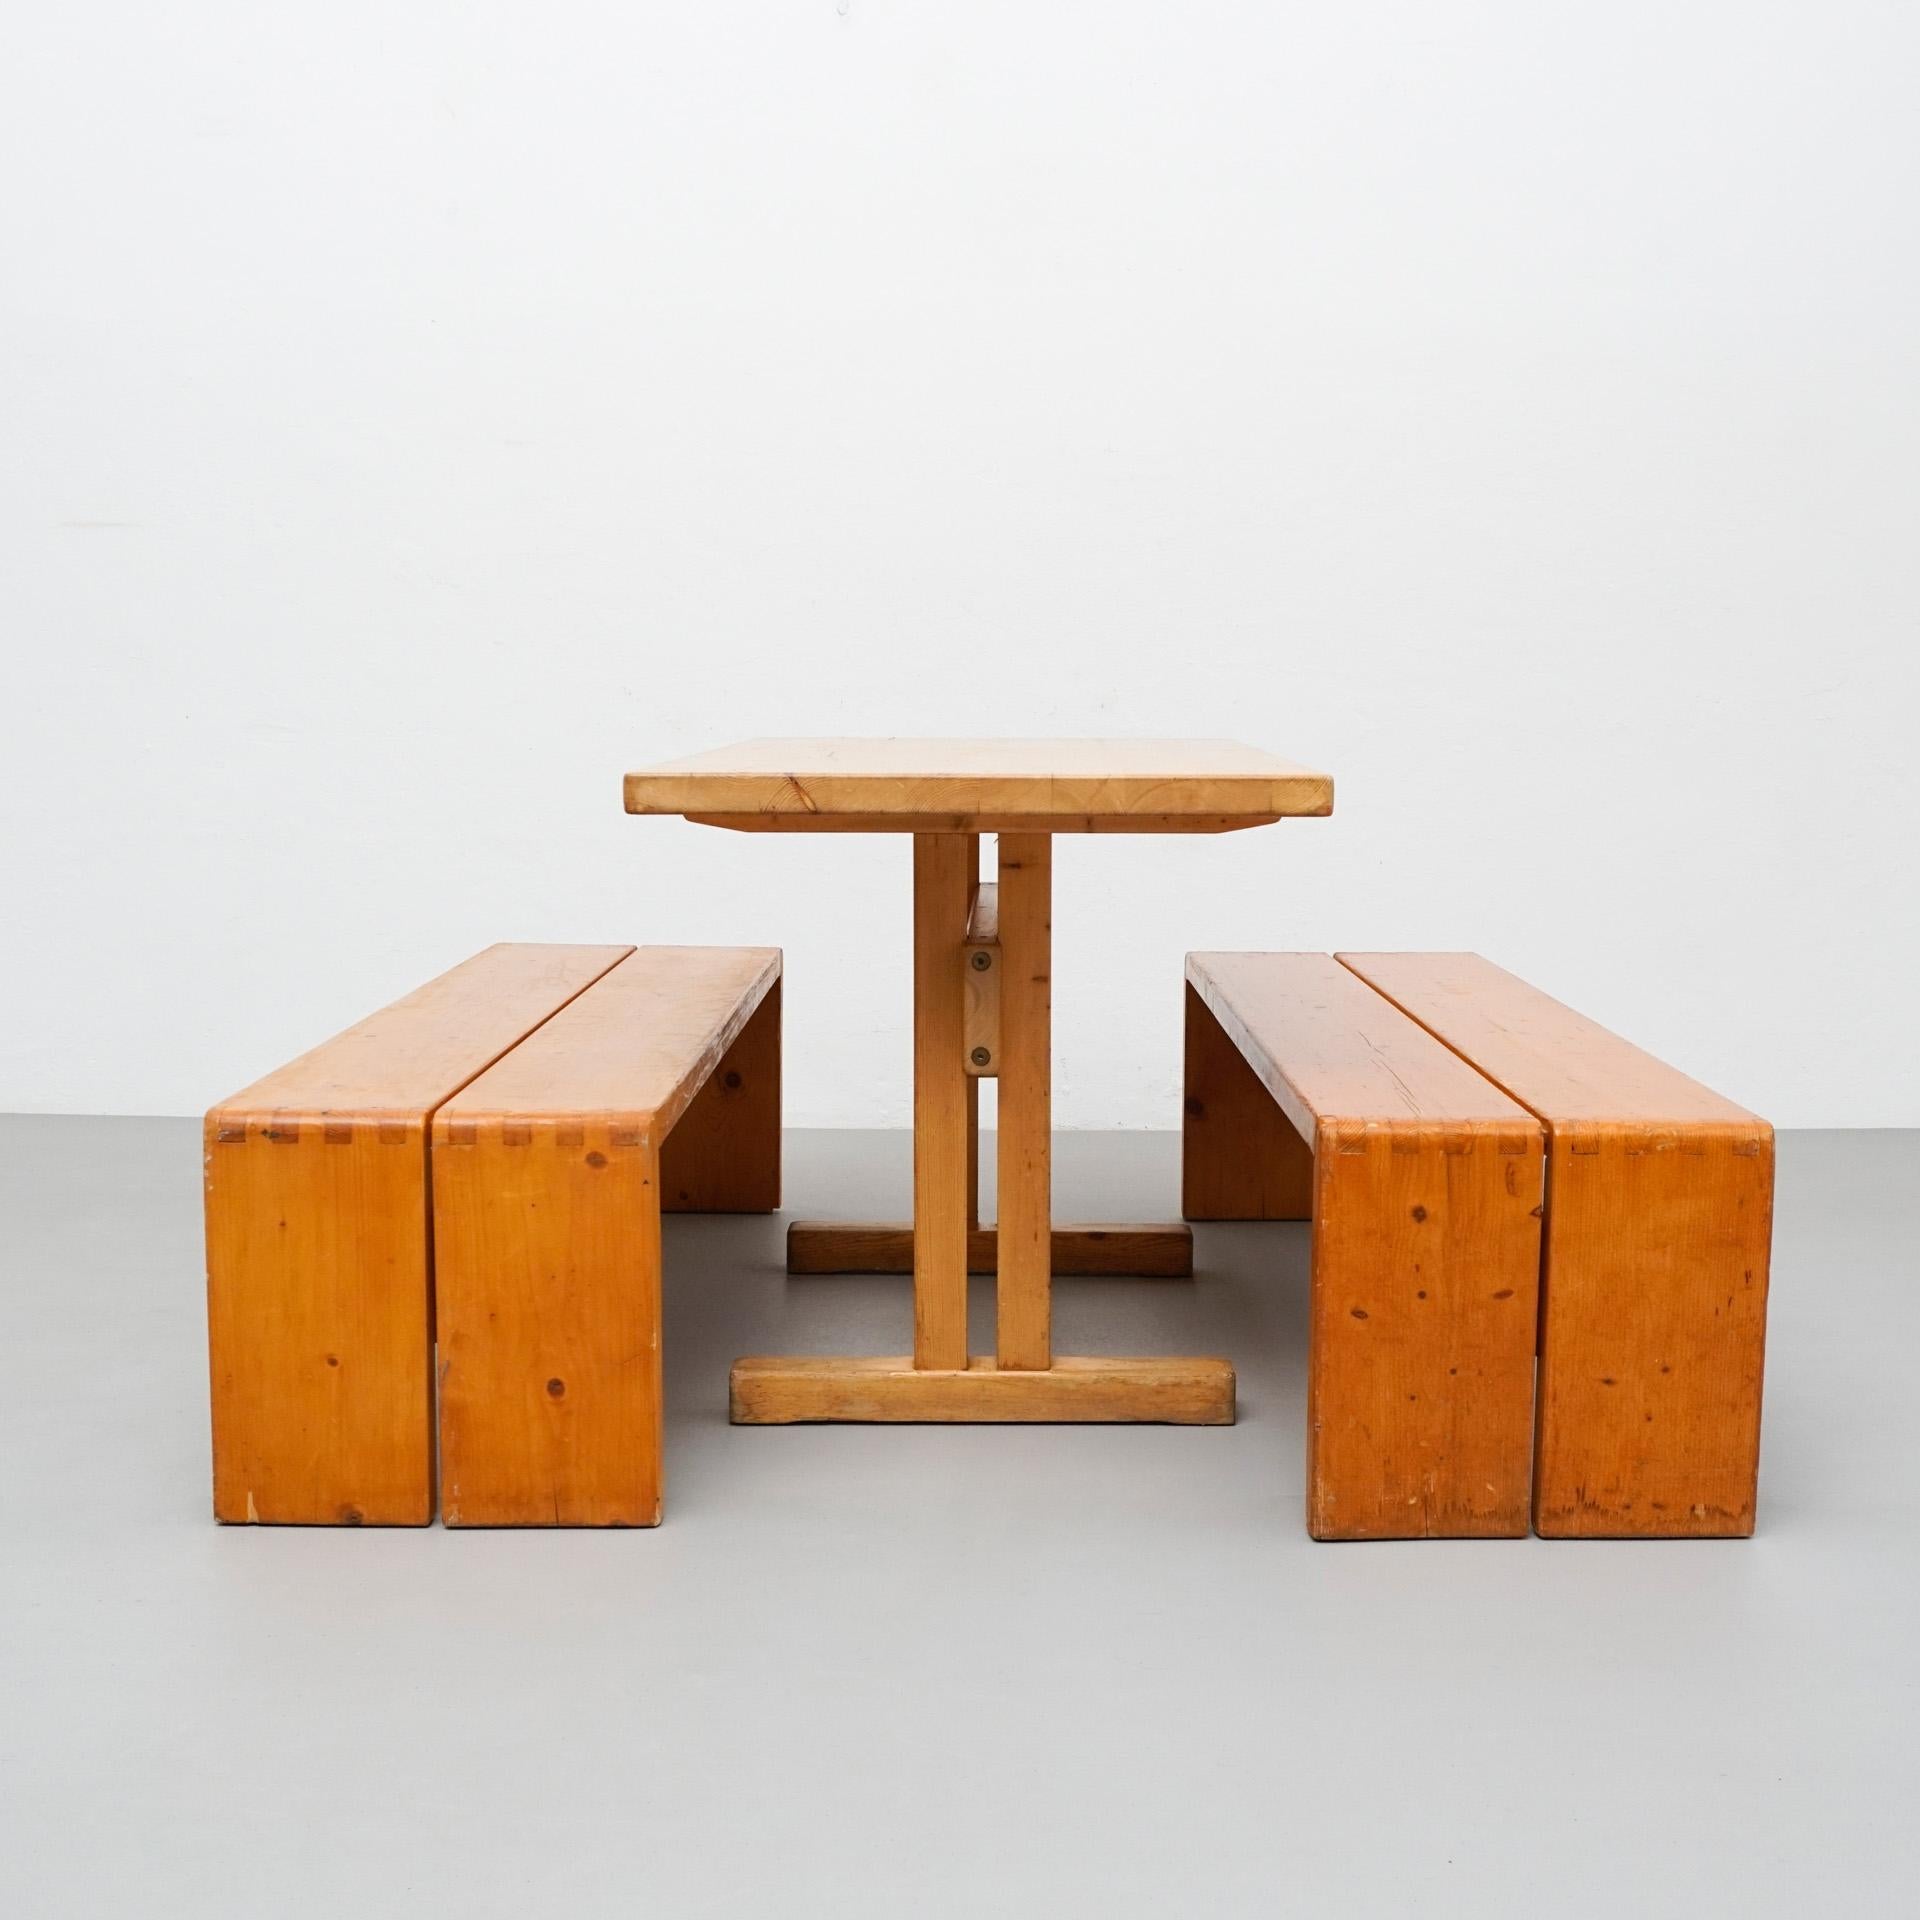 Set of table and benches designed by Charlotte Perriand for Les Arcs ski Resort, circa 1960, manufactured in France.

In good original condition, with minor wear consistent with age and use, preserving a beautiful patina.

Dimensions:
Table: D